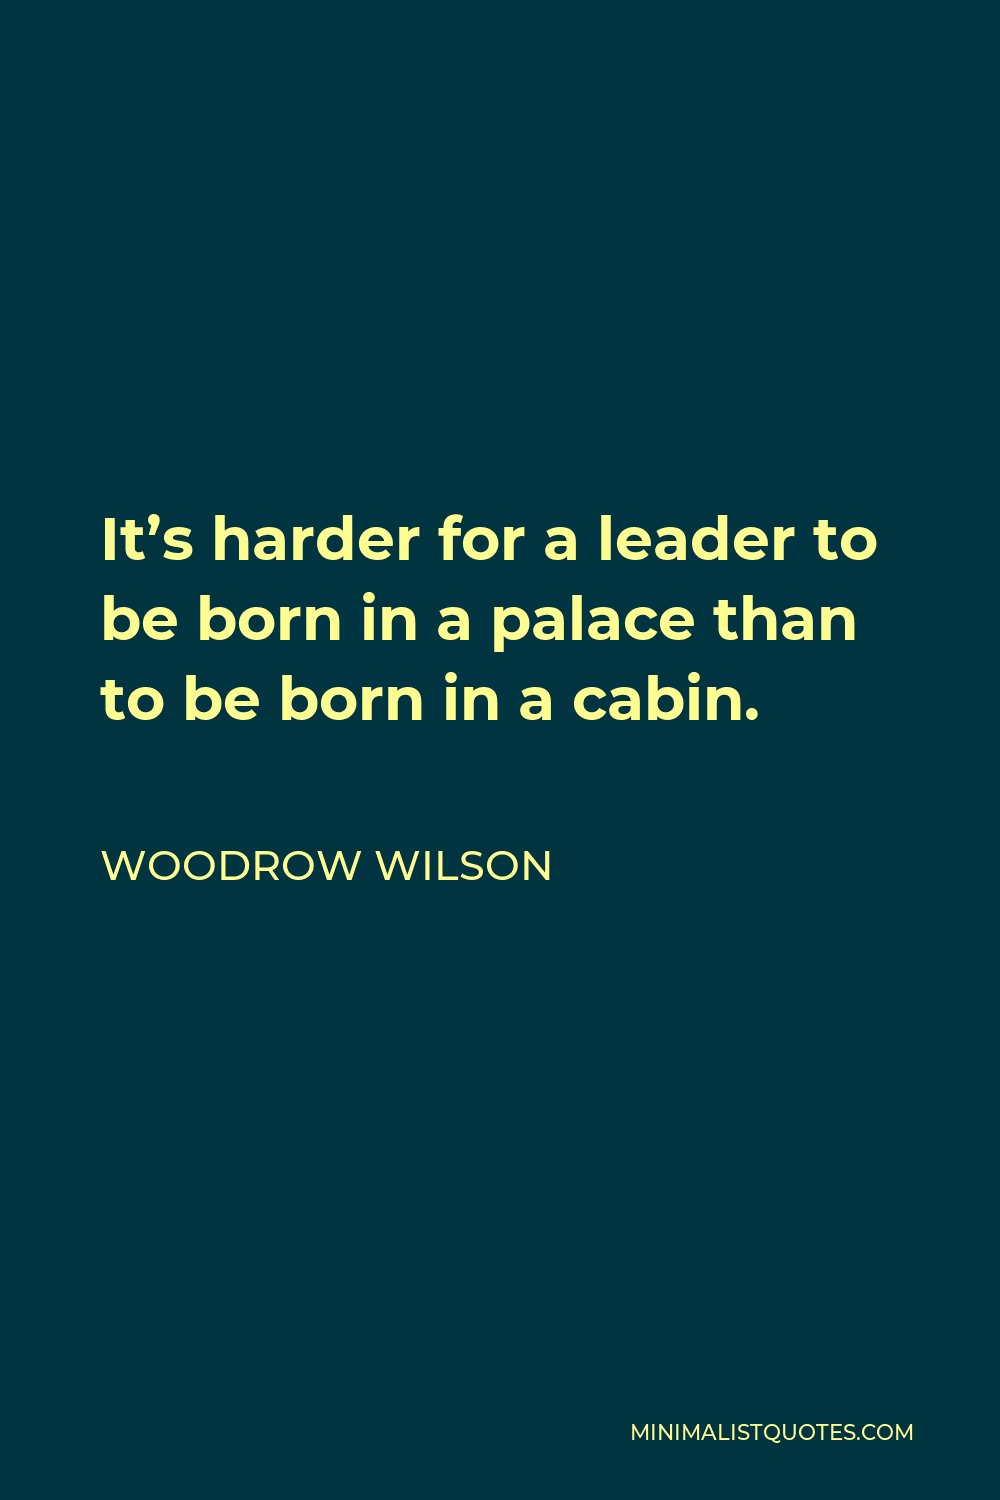 Woodrow Wilson Quote - It’s harder for a leader to be born in a palace than to be born in a cabin.